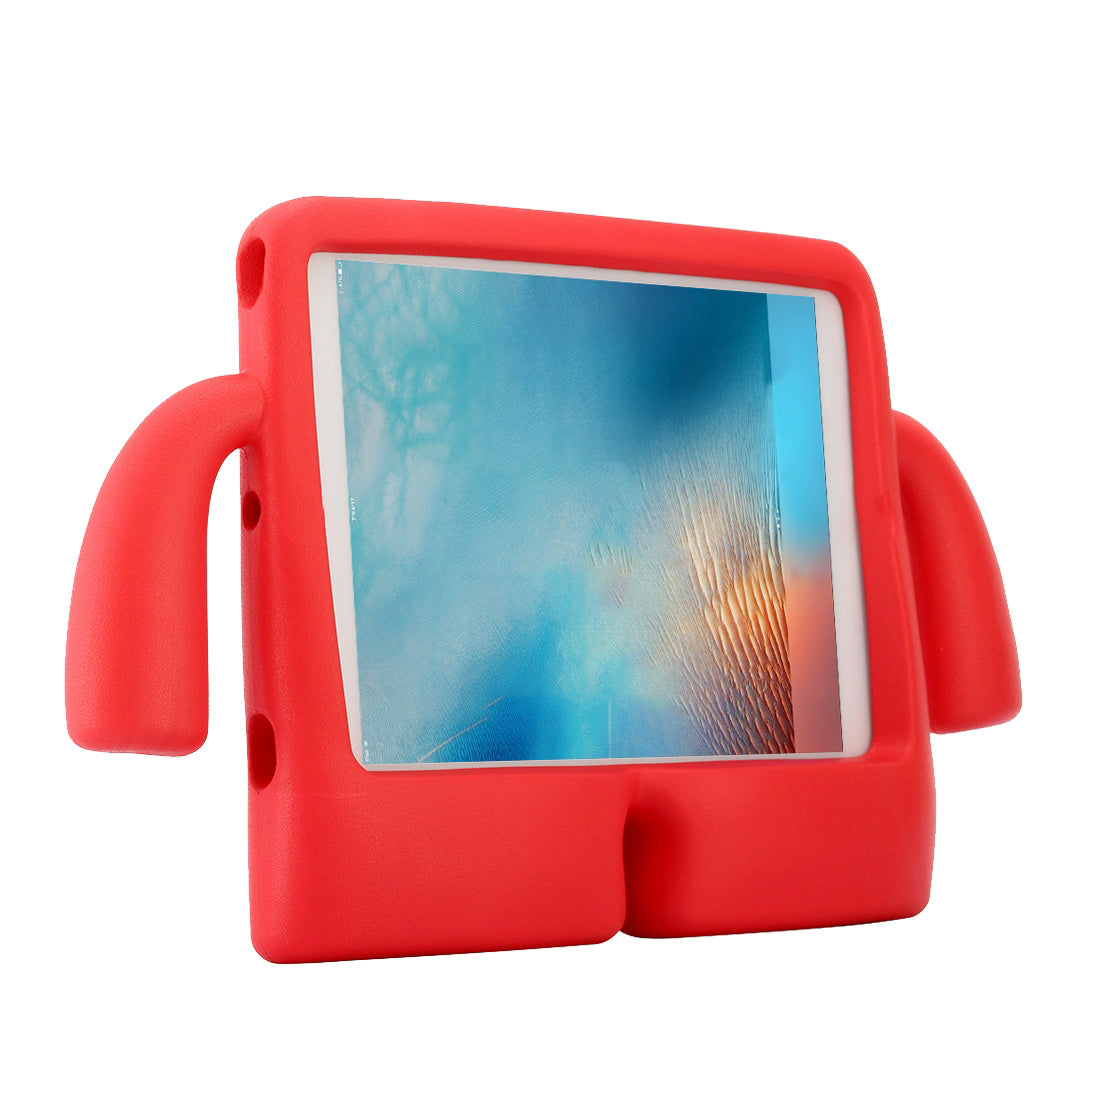 For Apple iPad 10.2 7th Gen 2019 Kids Case Shockproof Cover With Carry Handle - Red